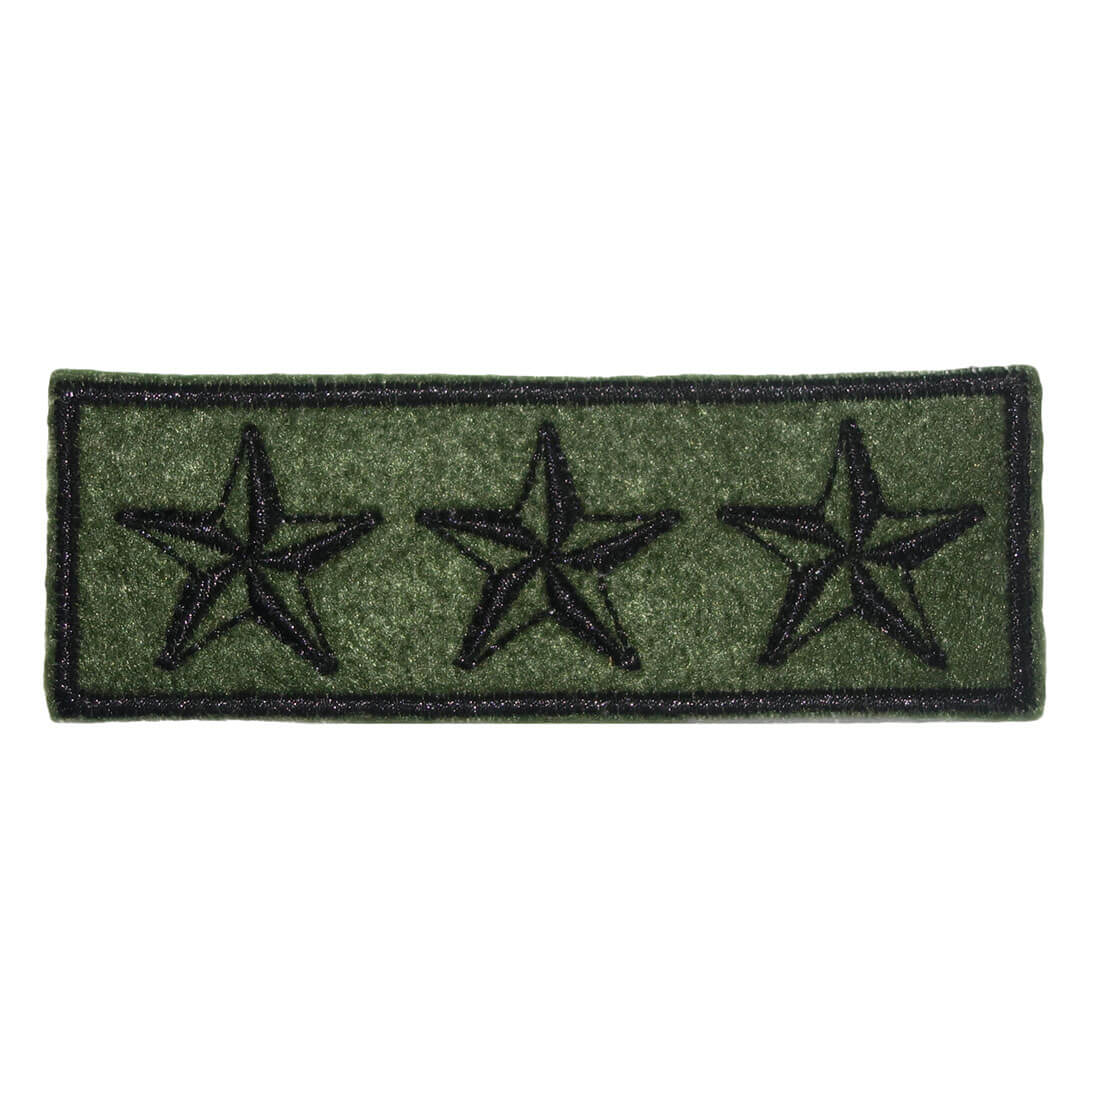 Jeans Patch Army Stars-0